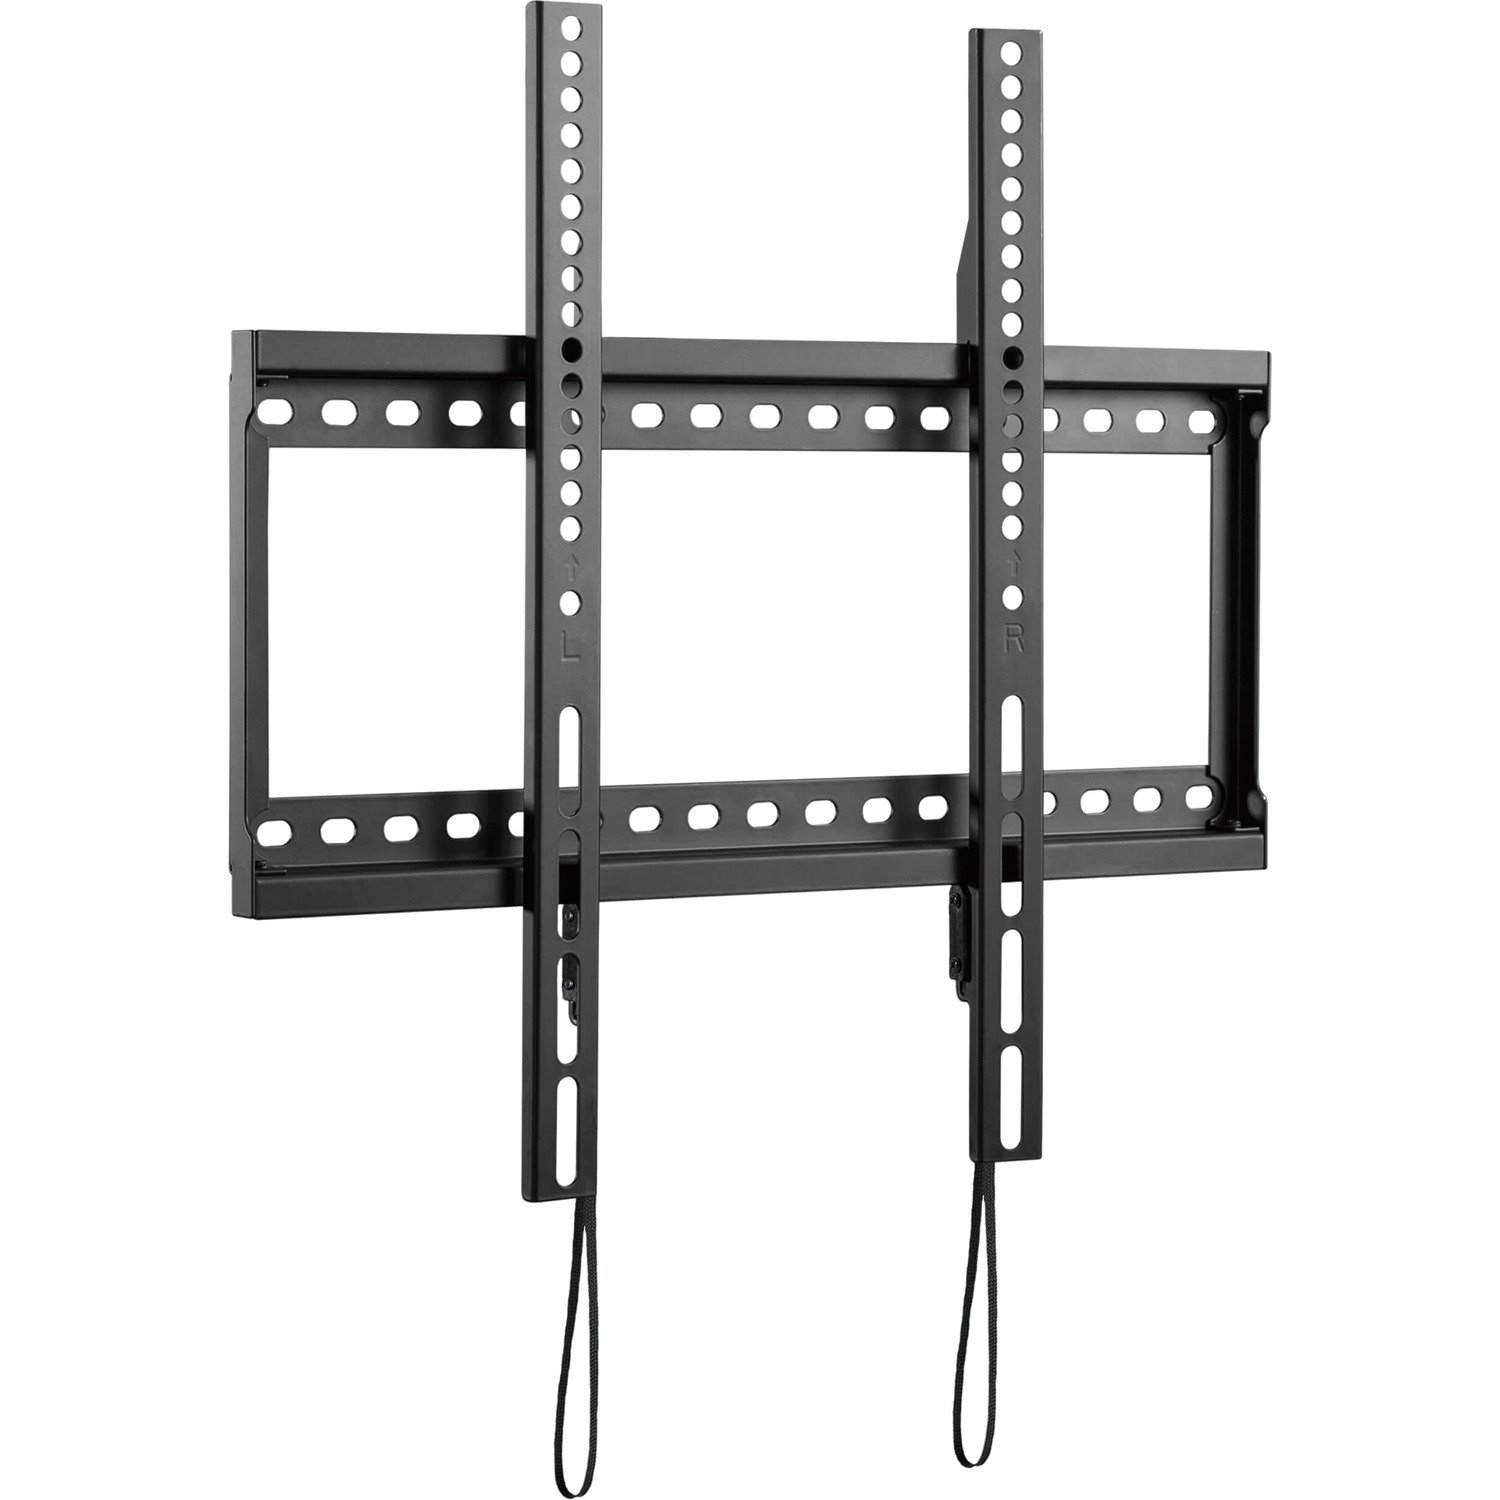 Tripp Lite by Eaton Fixed TV Wall Mount for 26" to 70" Displays - WallMount for TV, Curved Screen Display, Flat Panel Display, Monitor, Home Theater, HDTV - Black